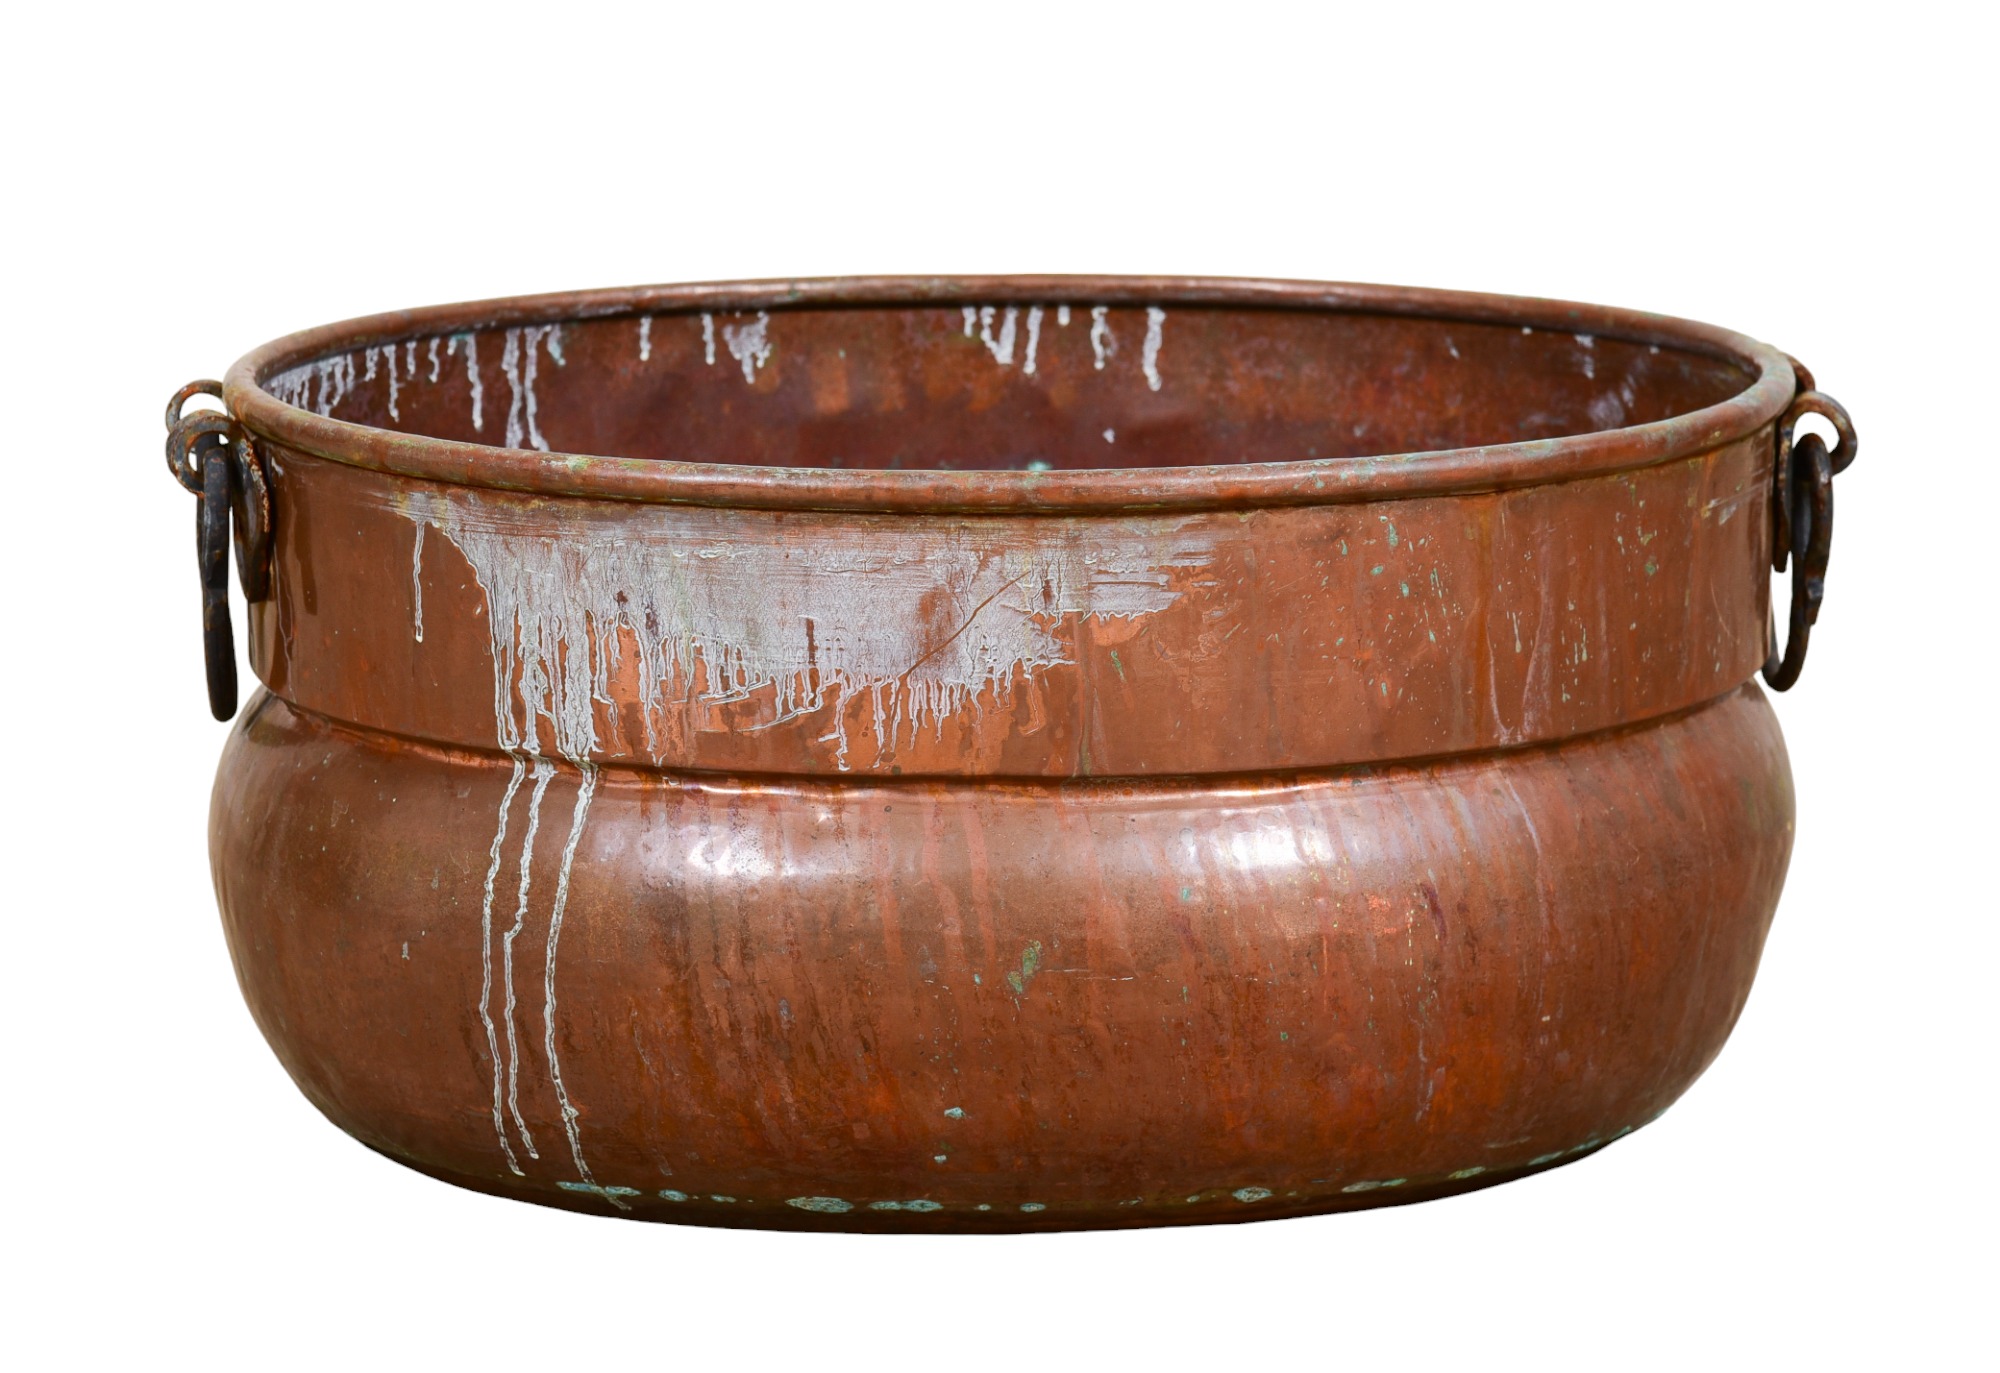 Oval copper wash basin with wrought